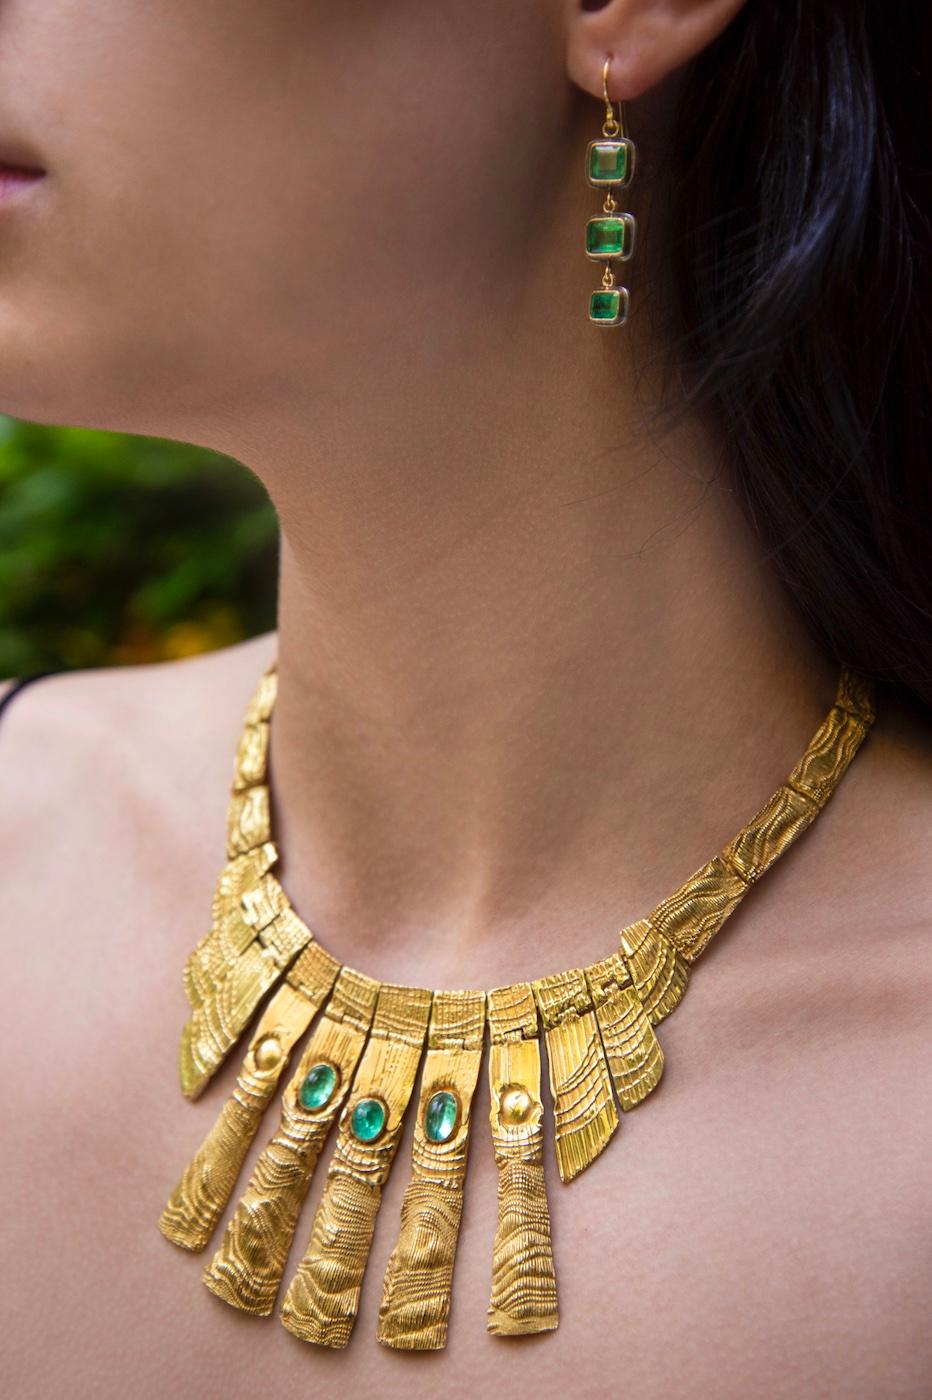 A collectible, one-of-a-kind, handmade cabochon emerald and 18 karat gold fringe necklace, by Charles de Temple, 1973, United Kingdom. The collar has a 15